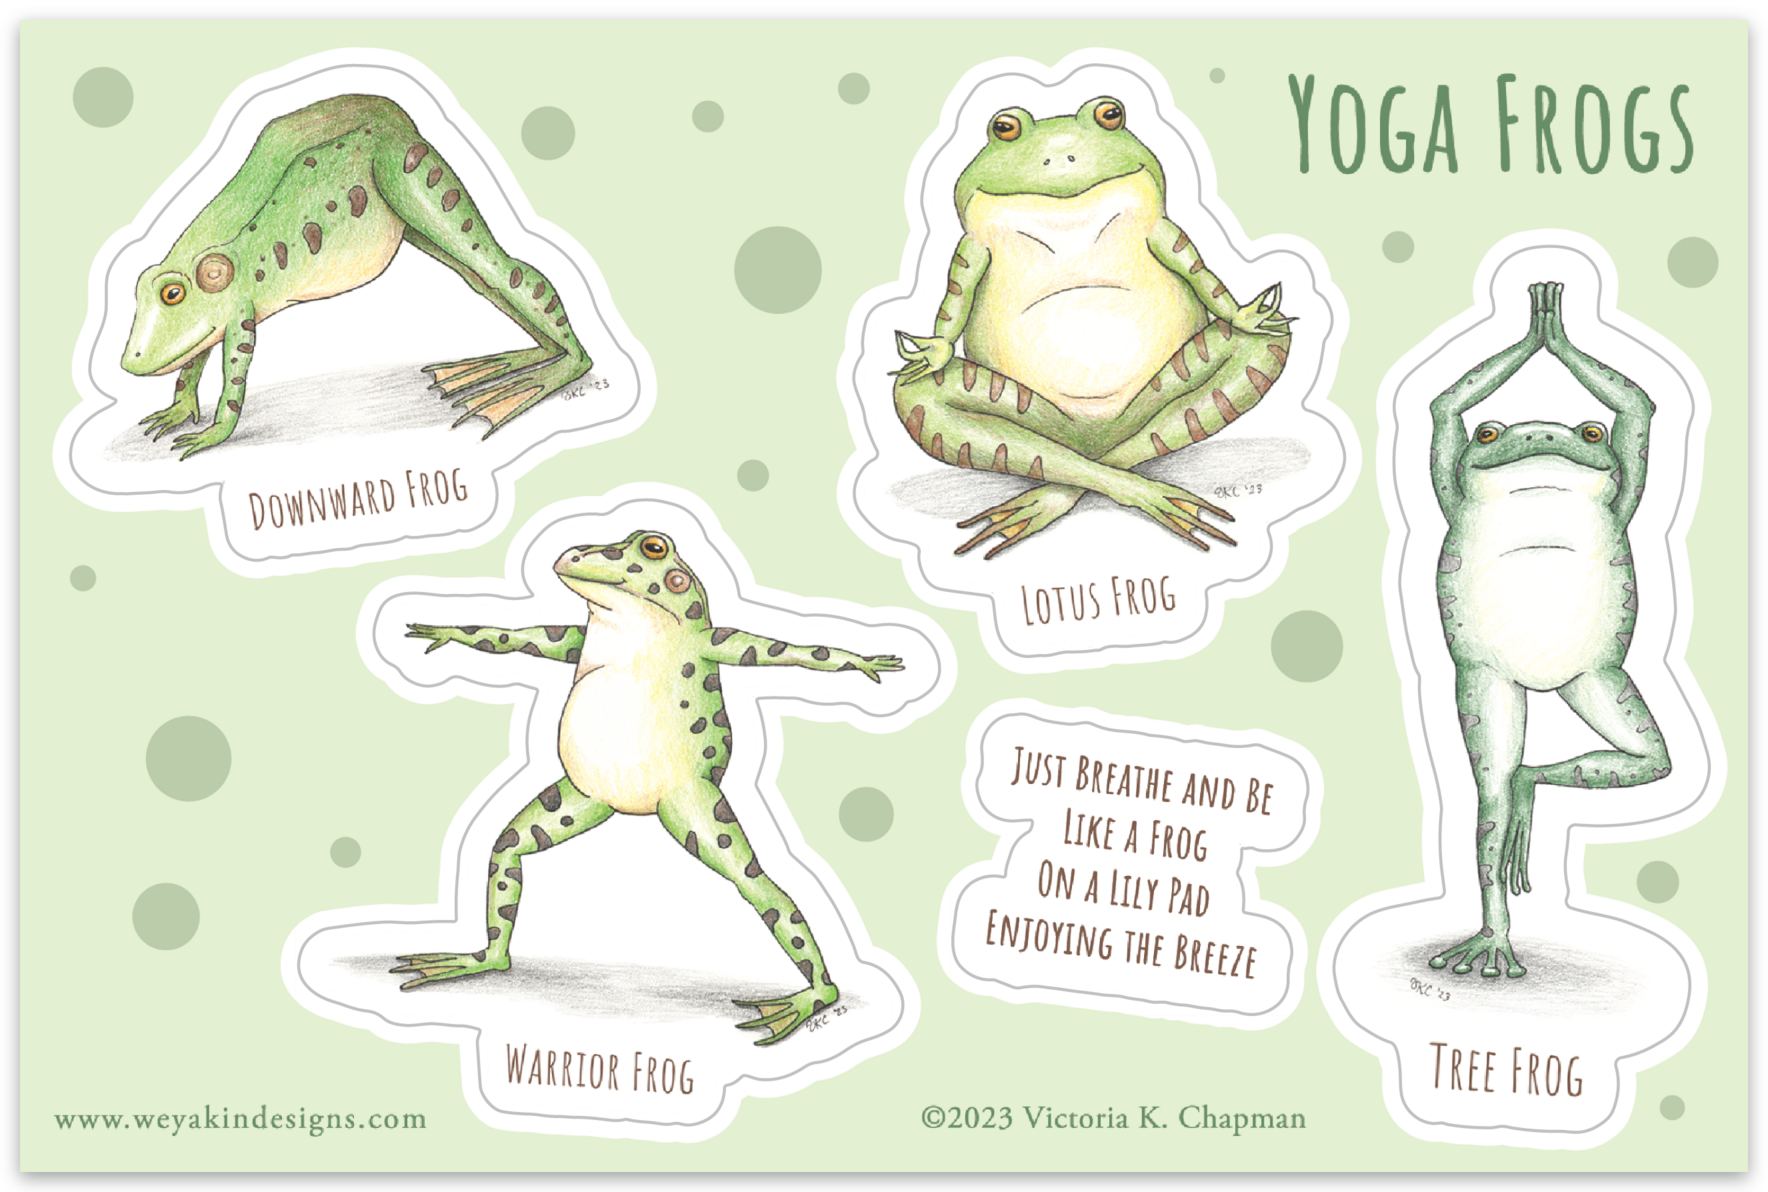 Yoga Frogs Sticker Sheet (4×6″ with 5 stickers total, vinyl